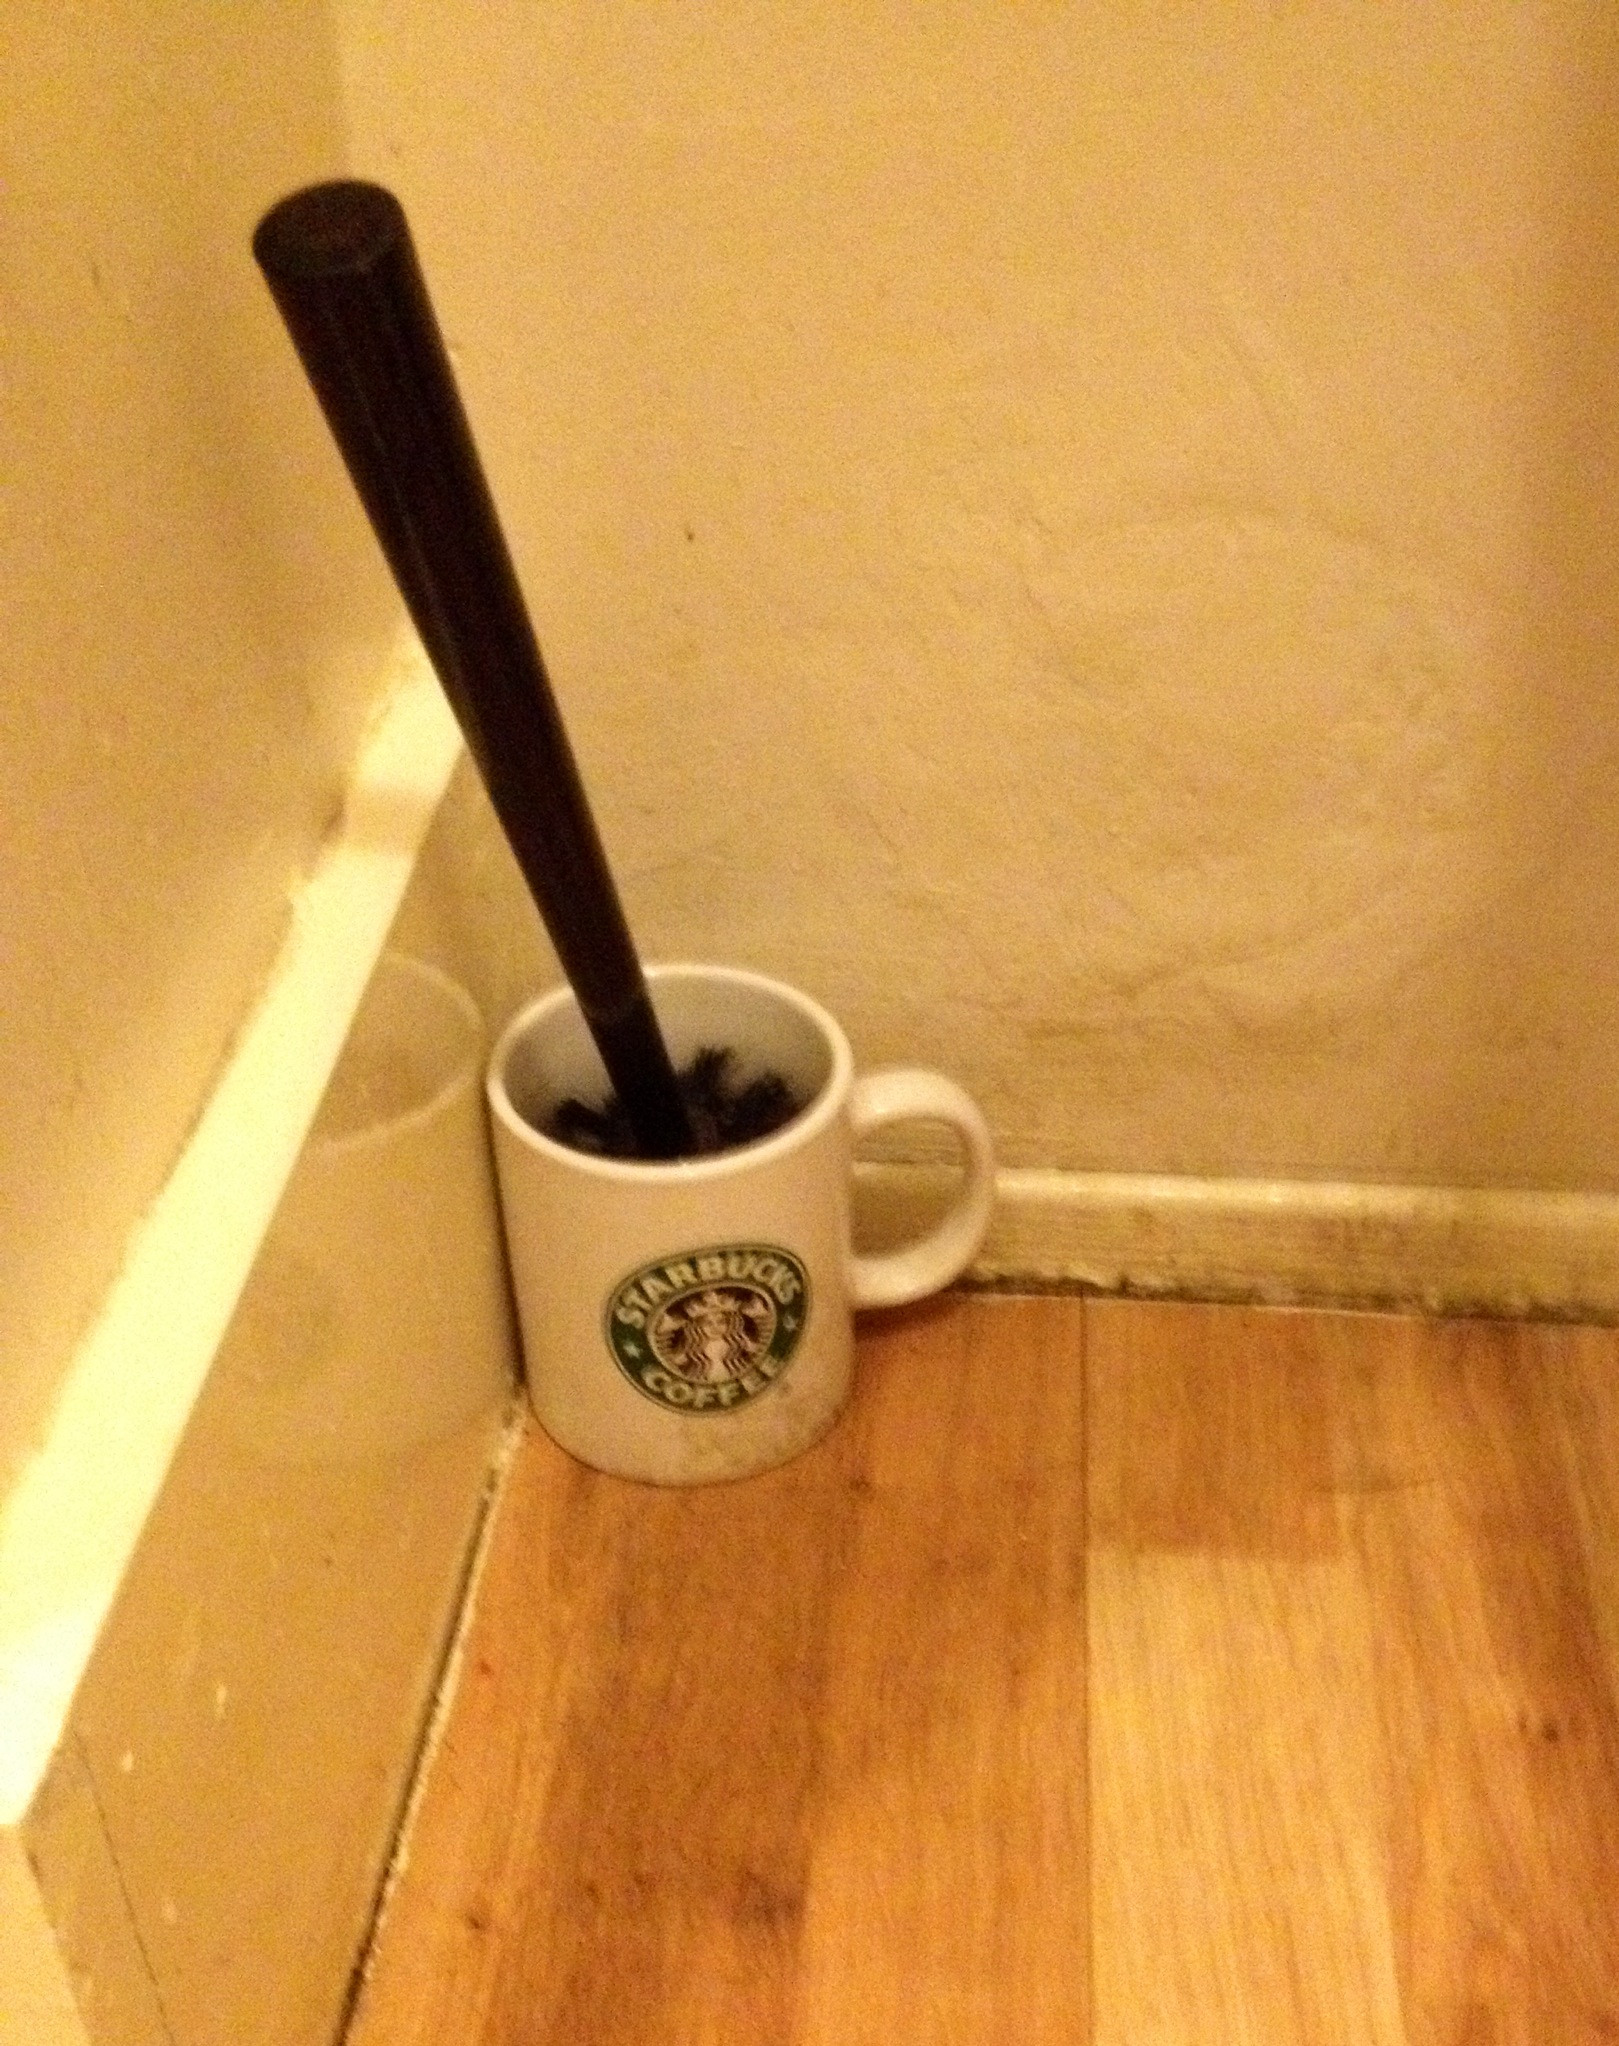 Holder for a toilet scrubber at an independent coffee shop